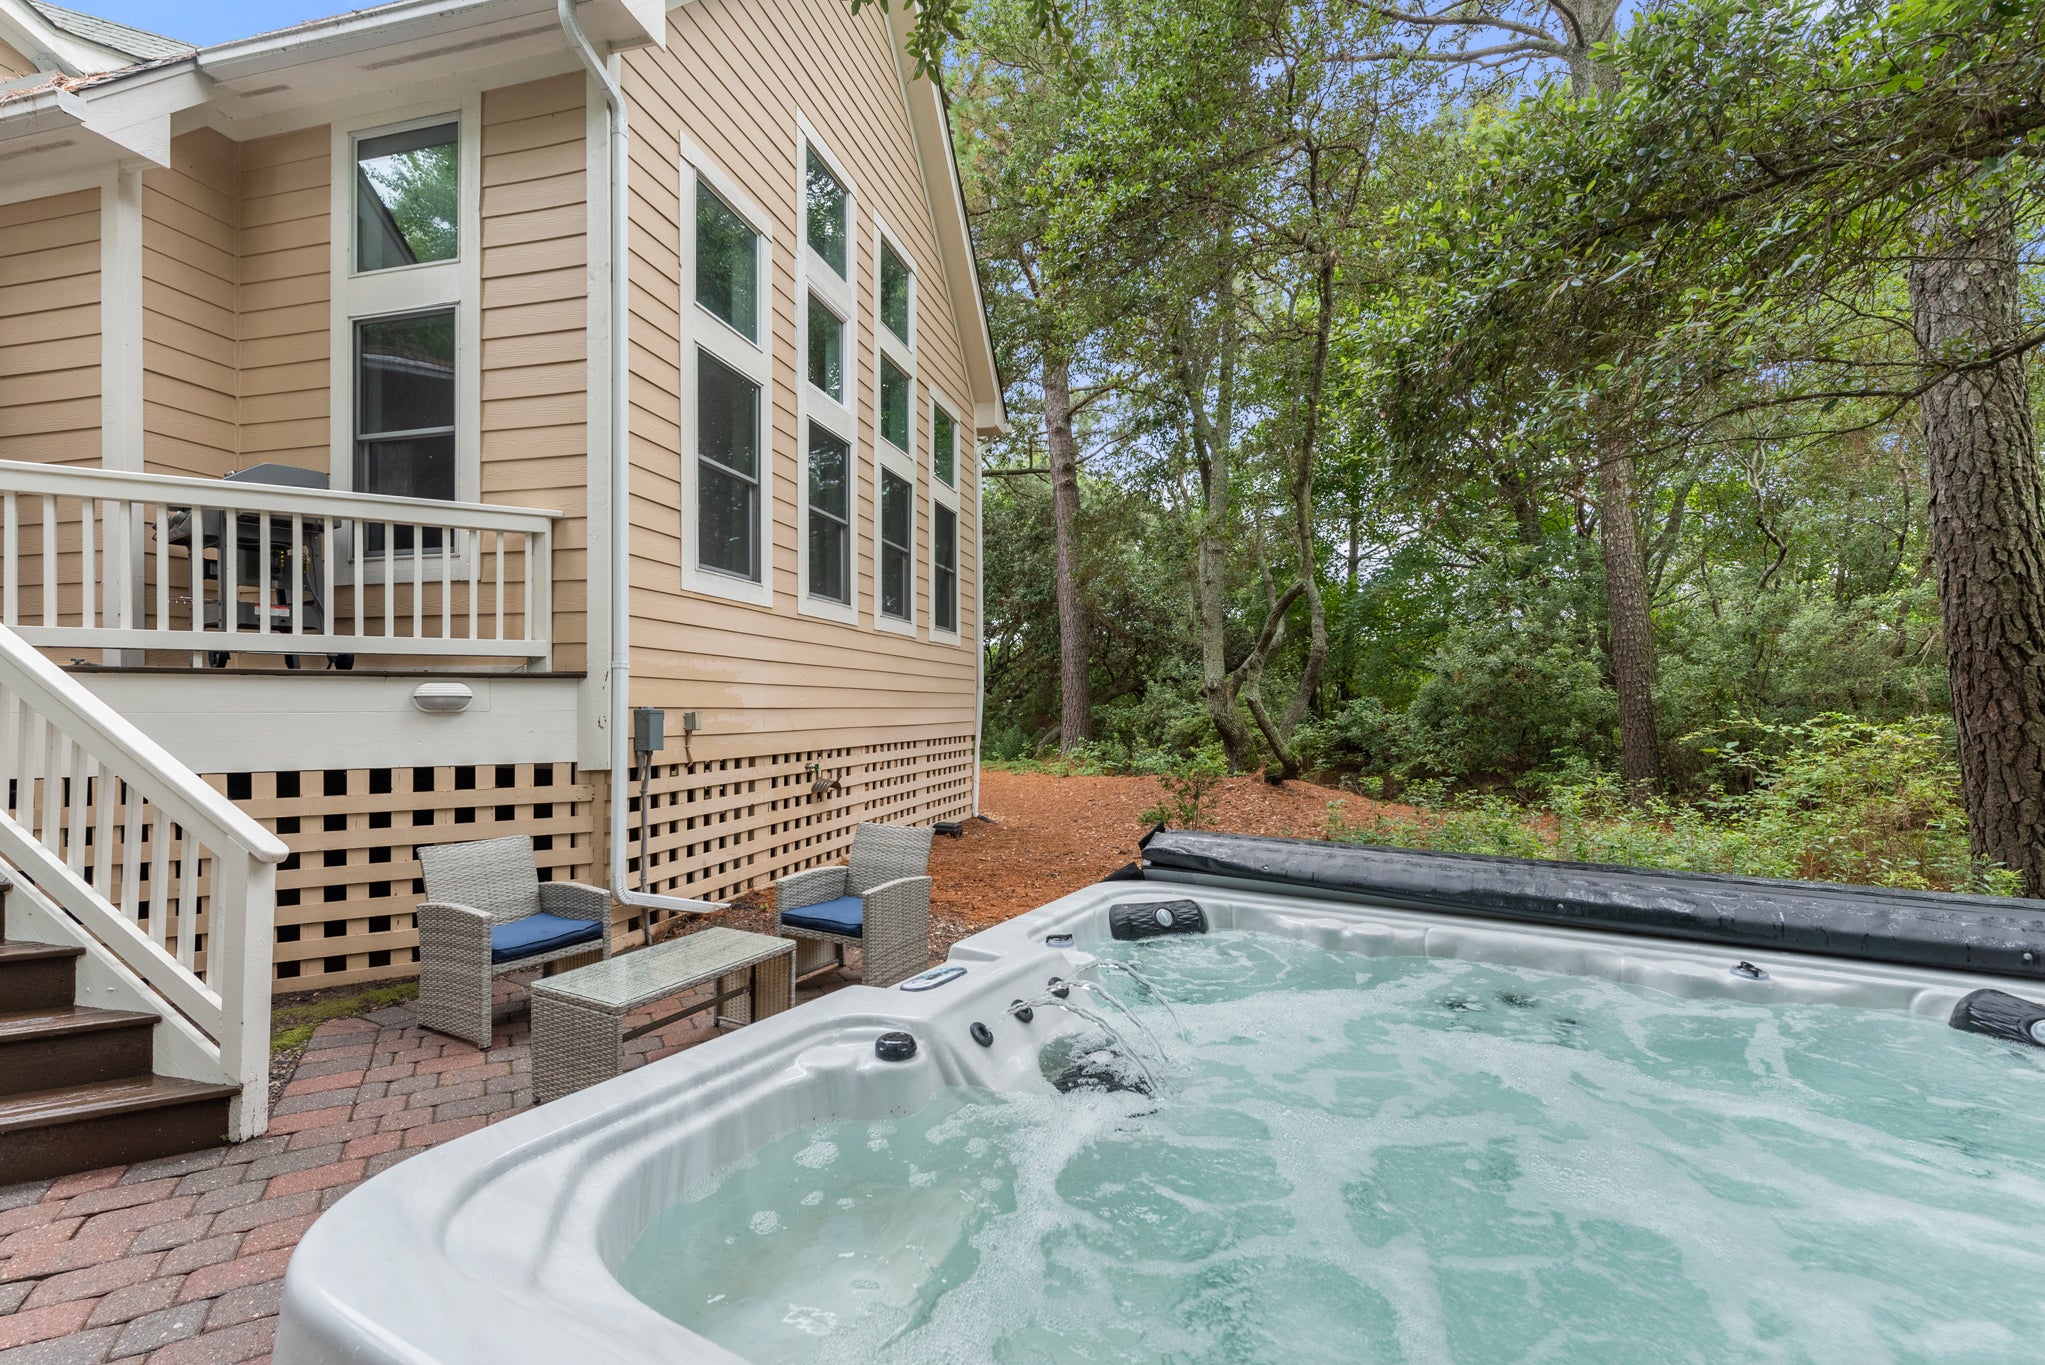 CC177: Picture This | Back Patio w/ Hot Tub